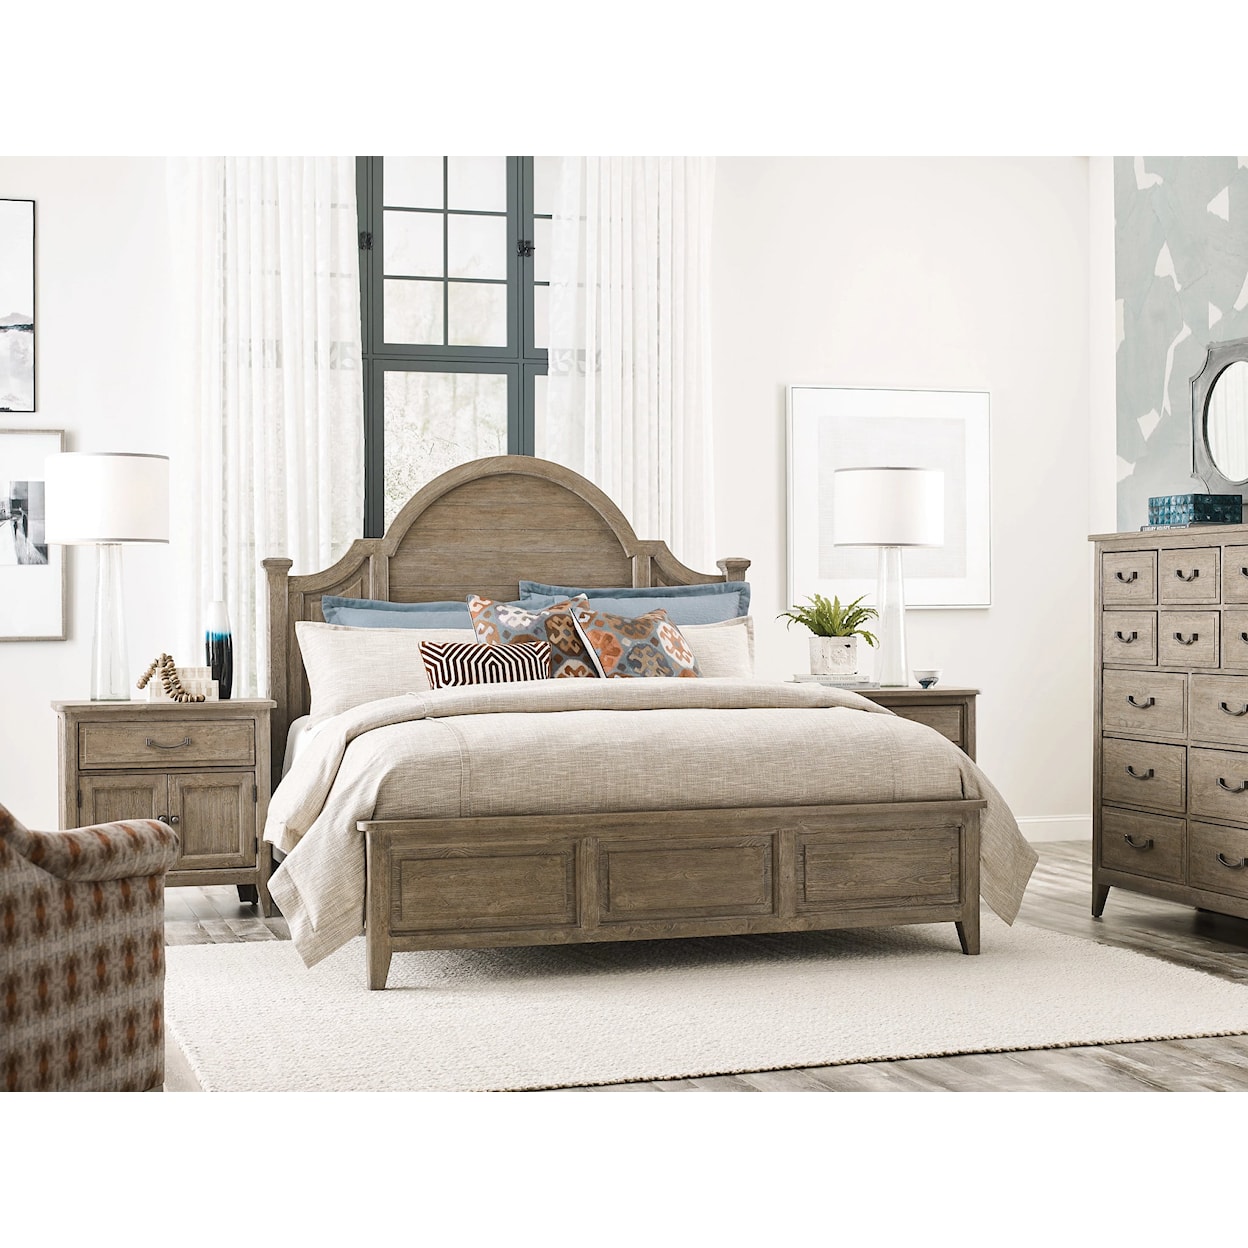 Kincaid Furniture Urban Cottage Allegheny Cal King Panel Bed Complete